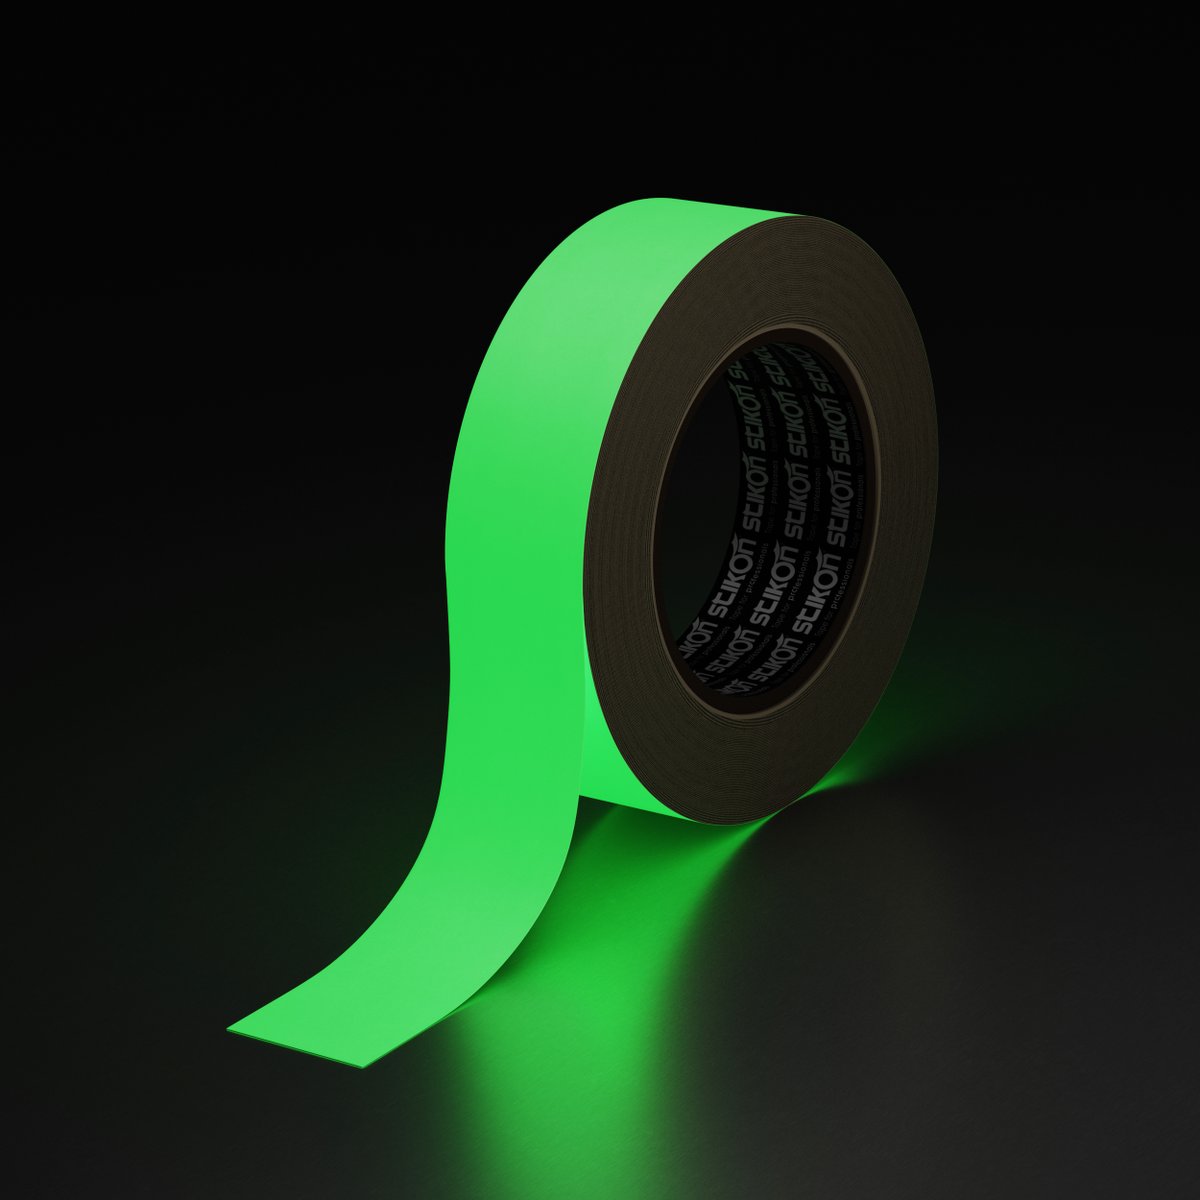 No lights? No problem, for our self-Adhesive Photoluminescent Marking Tape Glow-X. The purpose of the tape is to create a visual aid when usual light sources fail to do so. 

Available in our online store today.

#stikon  #adhesivetape #buyonline #tape #glowinthedark #safety